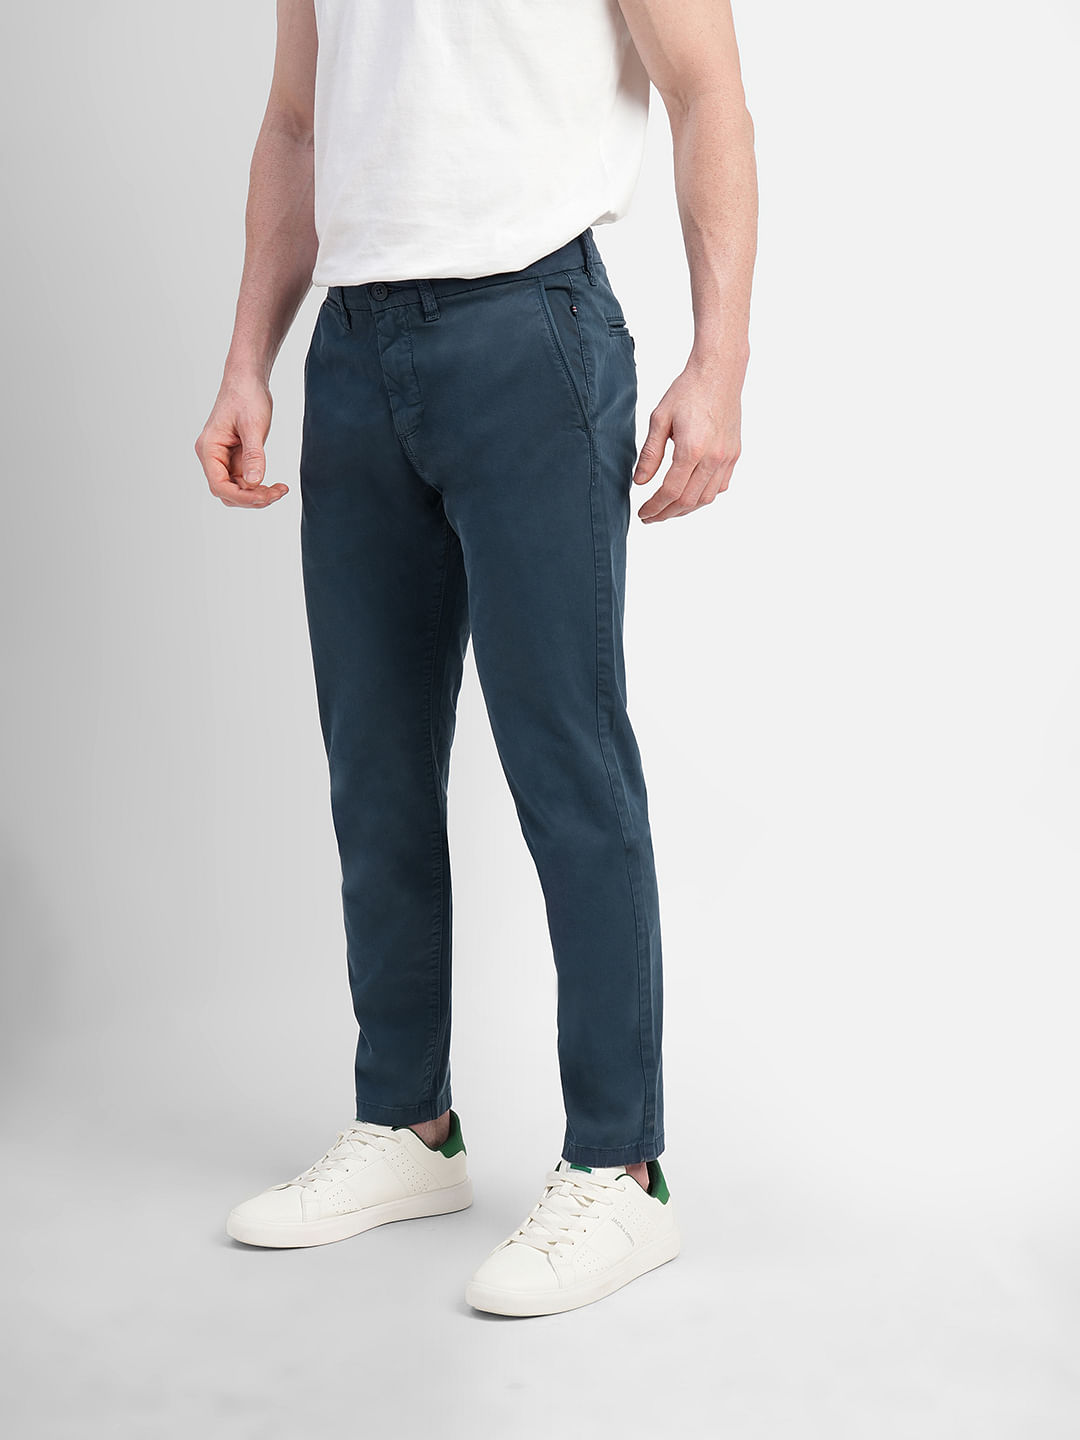 Buy Men 4 Colour Chinos Jeans Wholesale Rs 465 at jeanswholesalerin